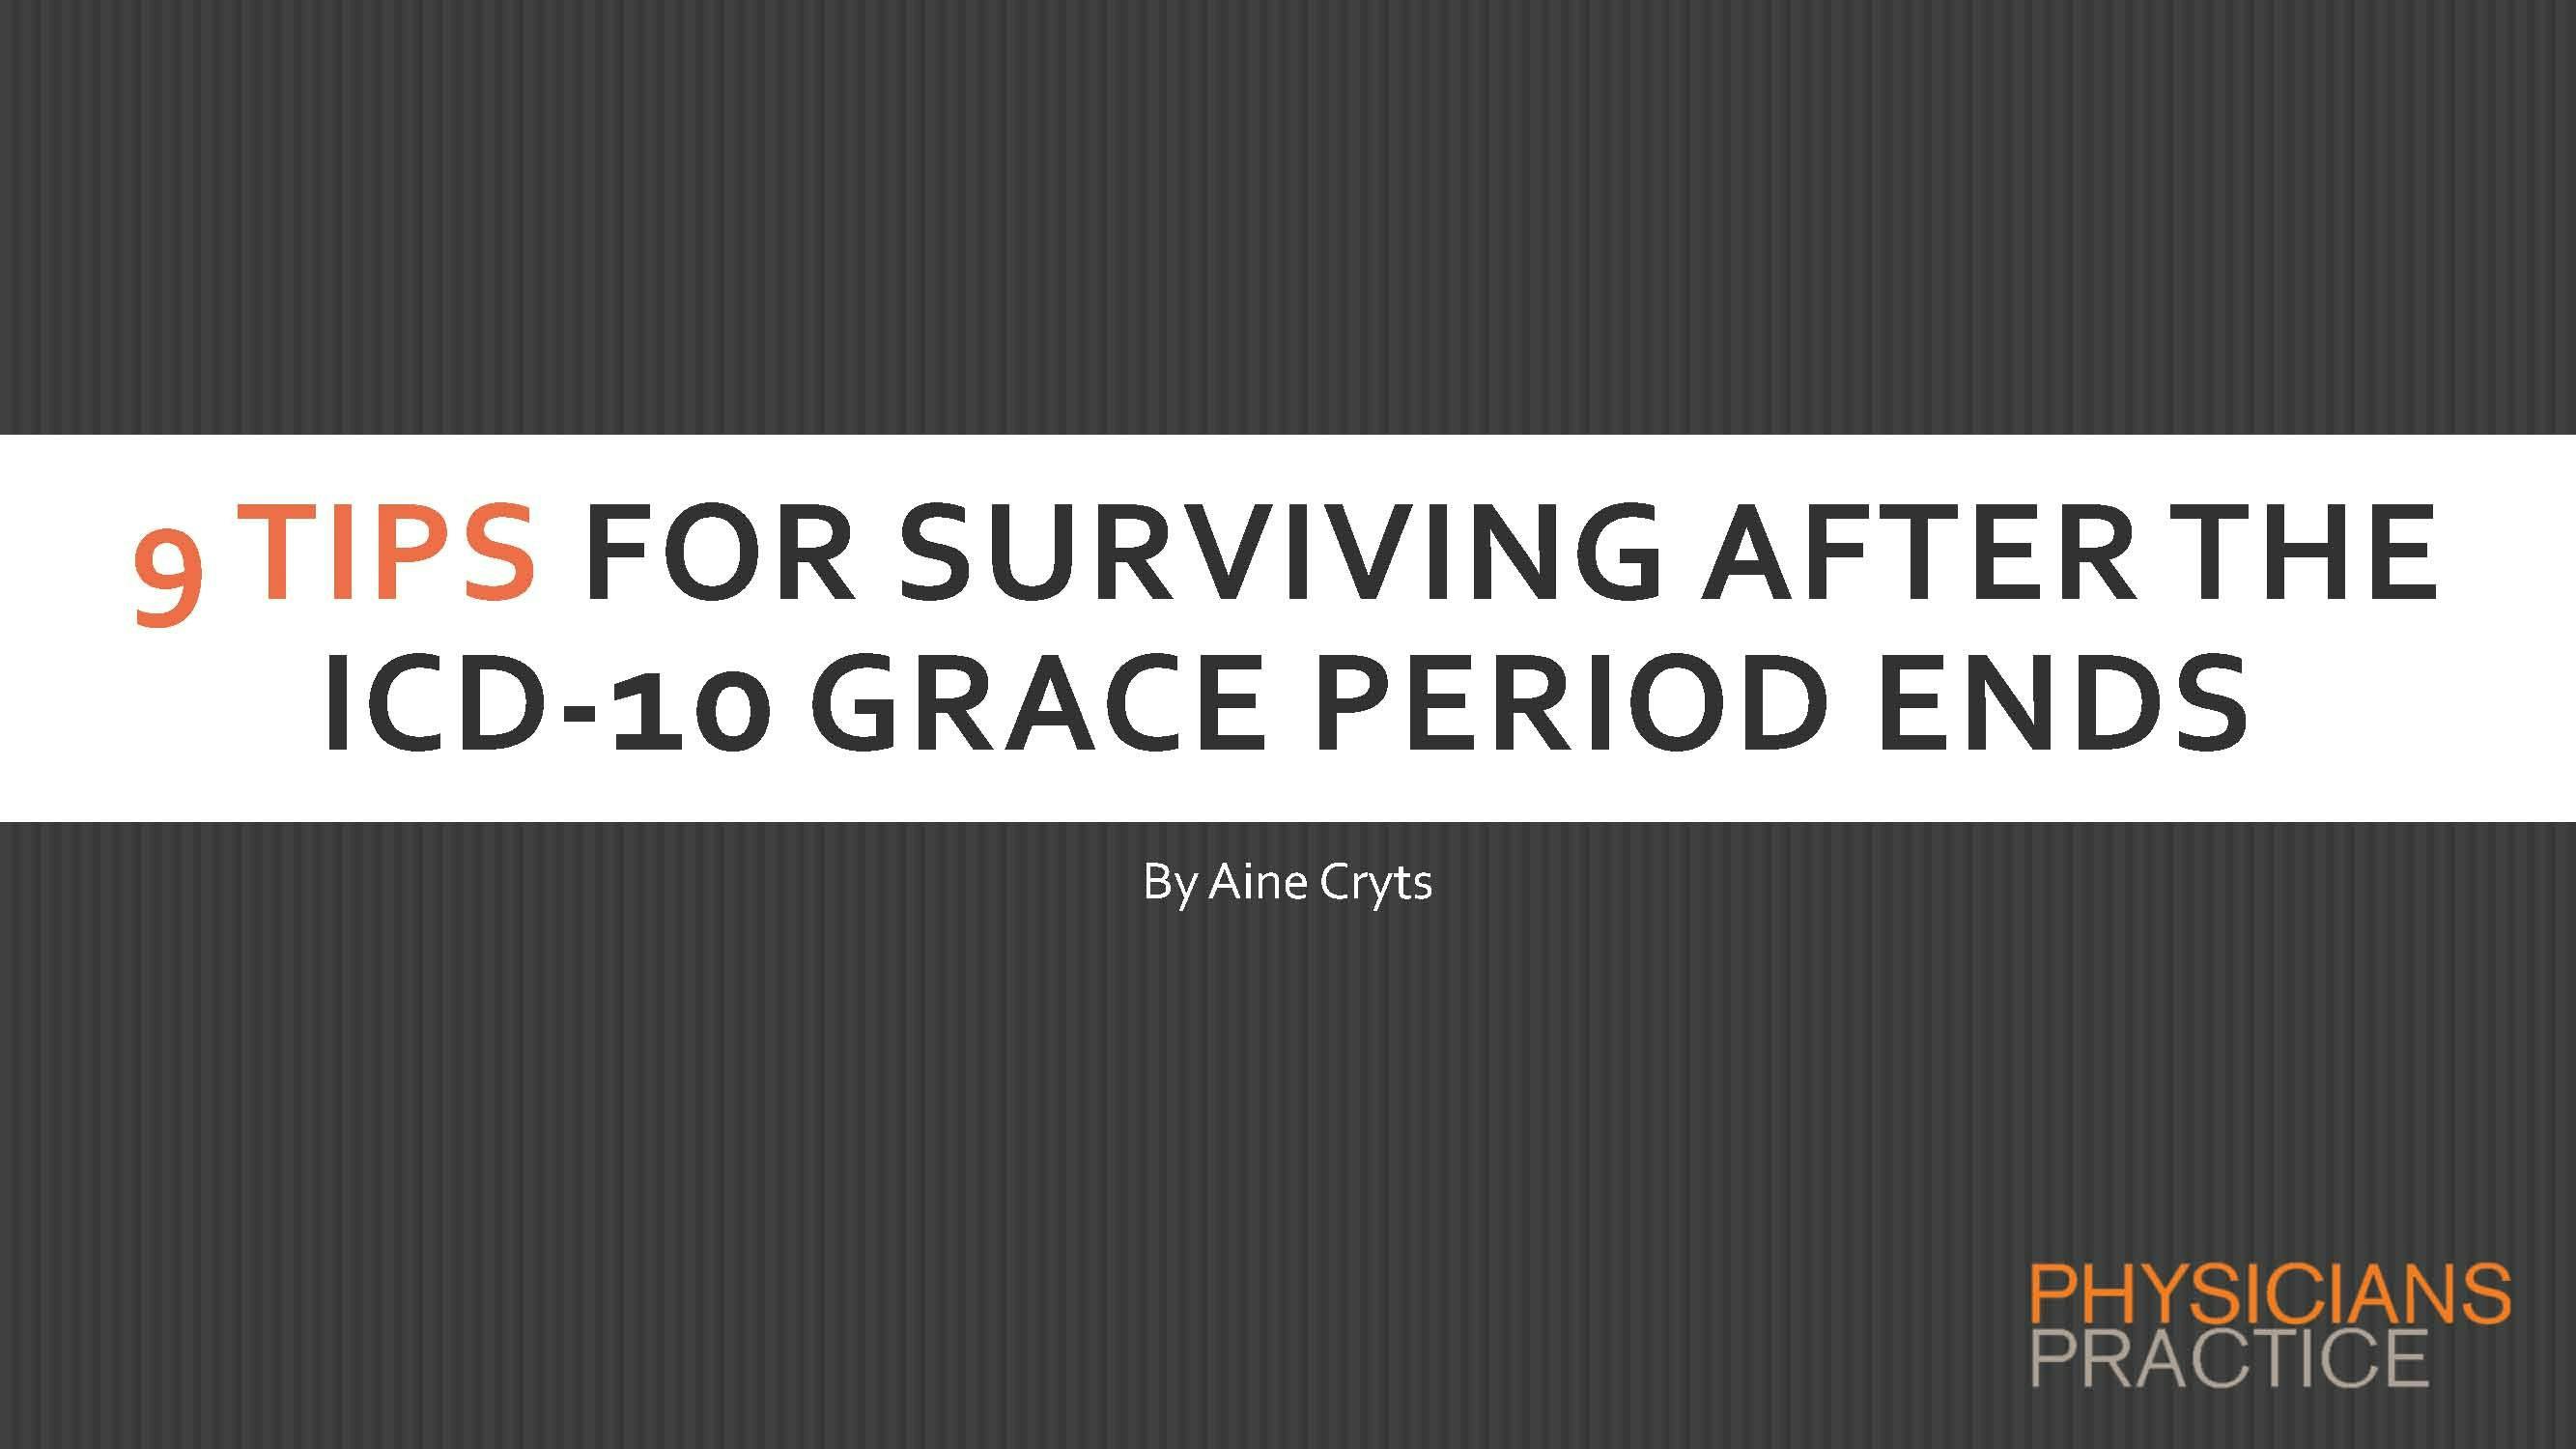 9 Tips for Surviving after the ICD-10 Grace Period Ends